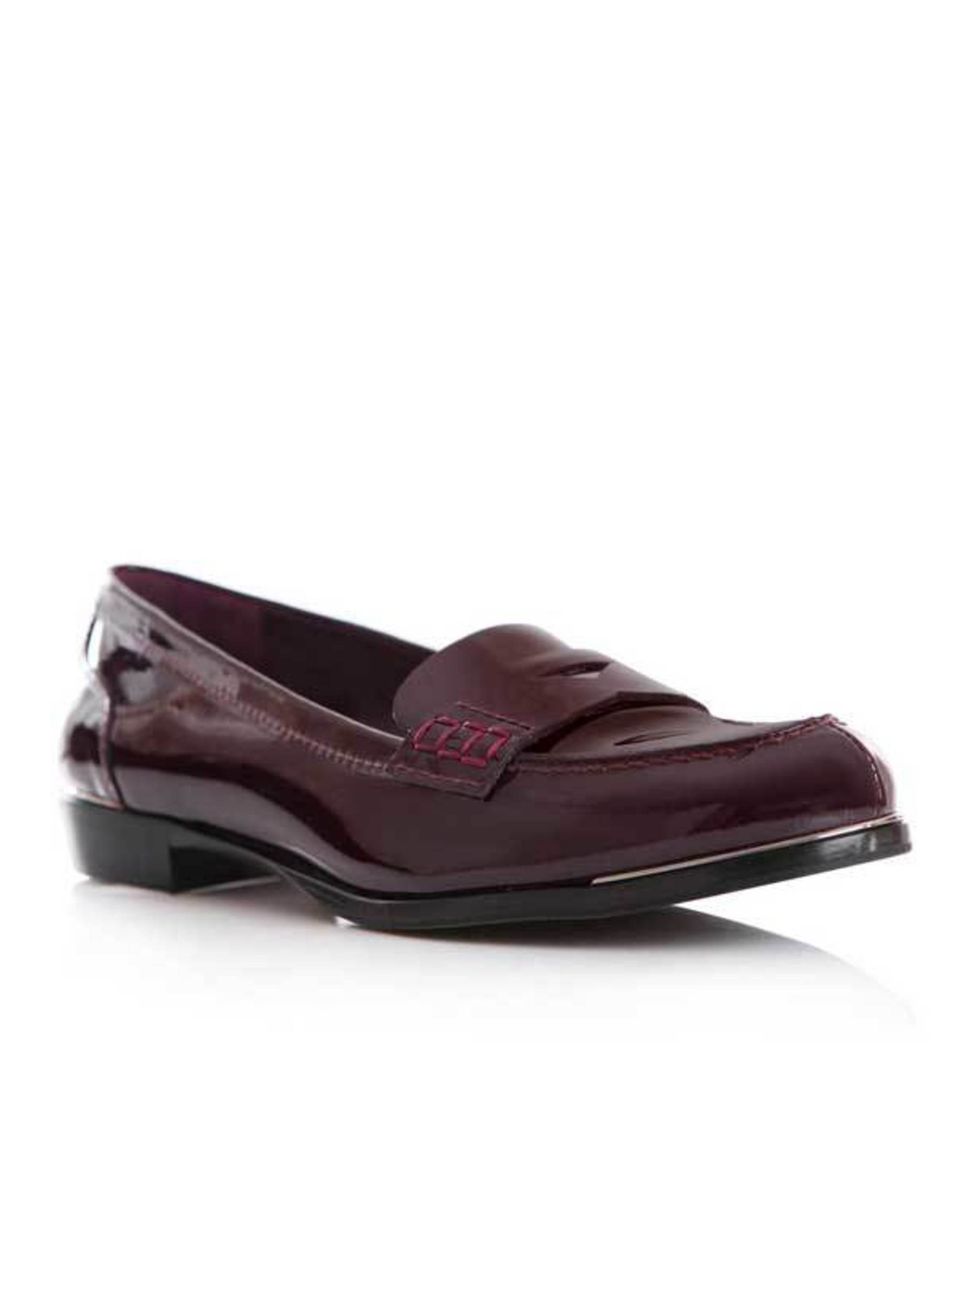 <p>Miu Miu burgundy patent loafers, was £300, now £180, at <a href="http://www.matchesfashion.com/fcp/product/Matches-Fashion//miu-miu-MIU-Y-5D7724-XWA-shoes-BURGUNDY/46203">Matches</a> </p>